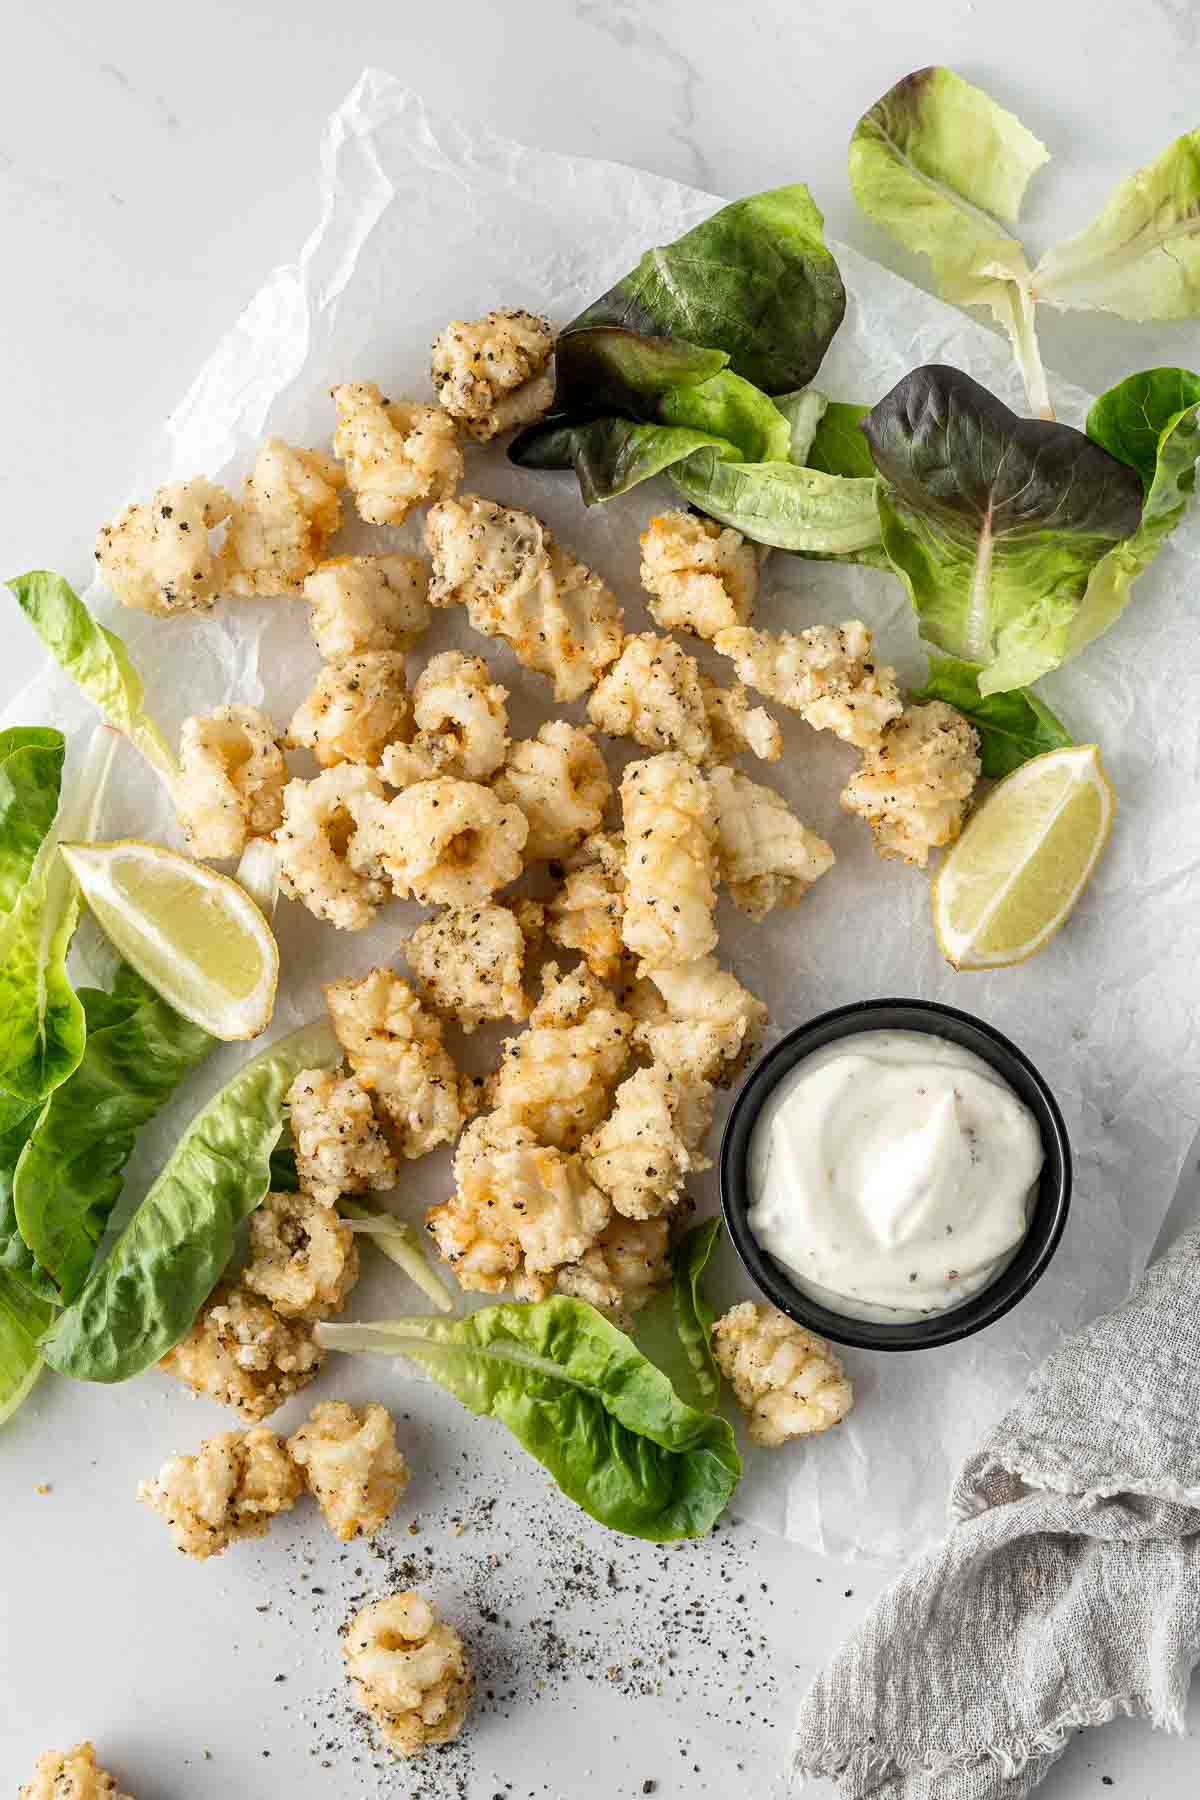 Salt and pepper squid with lemon, salad and aioli. 